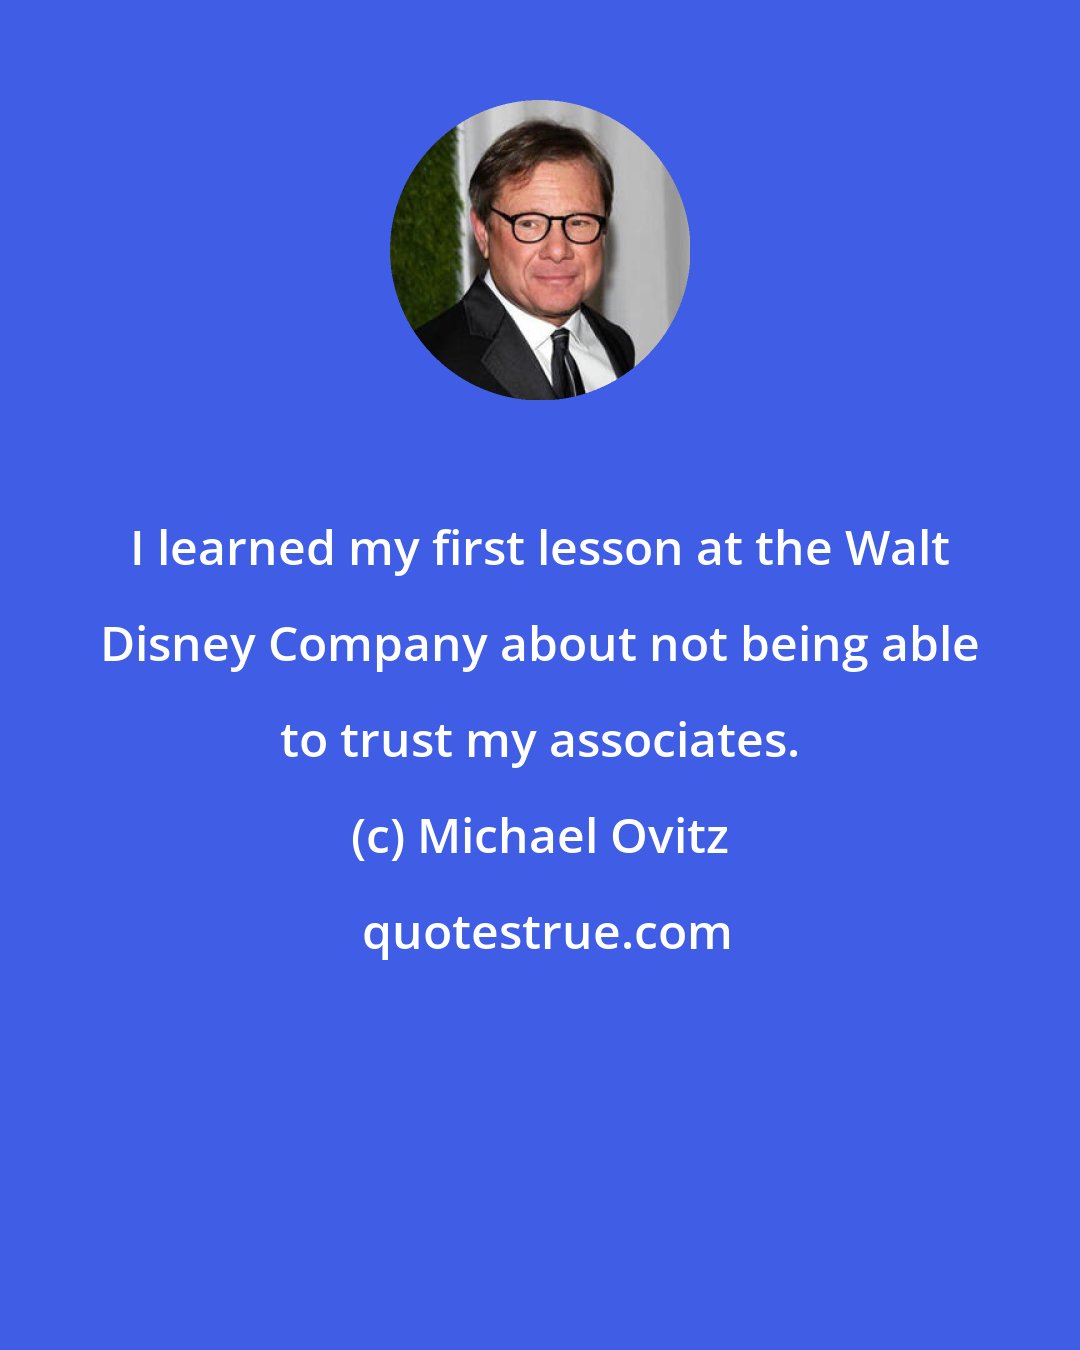 Michael Ovitz: I learned my first lesson at the Walt Disney Company about not being able to trust my associates.